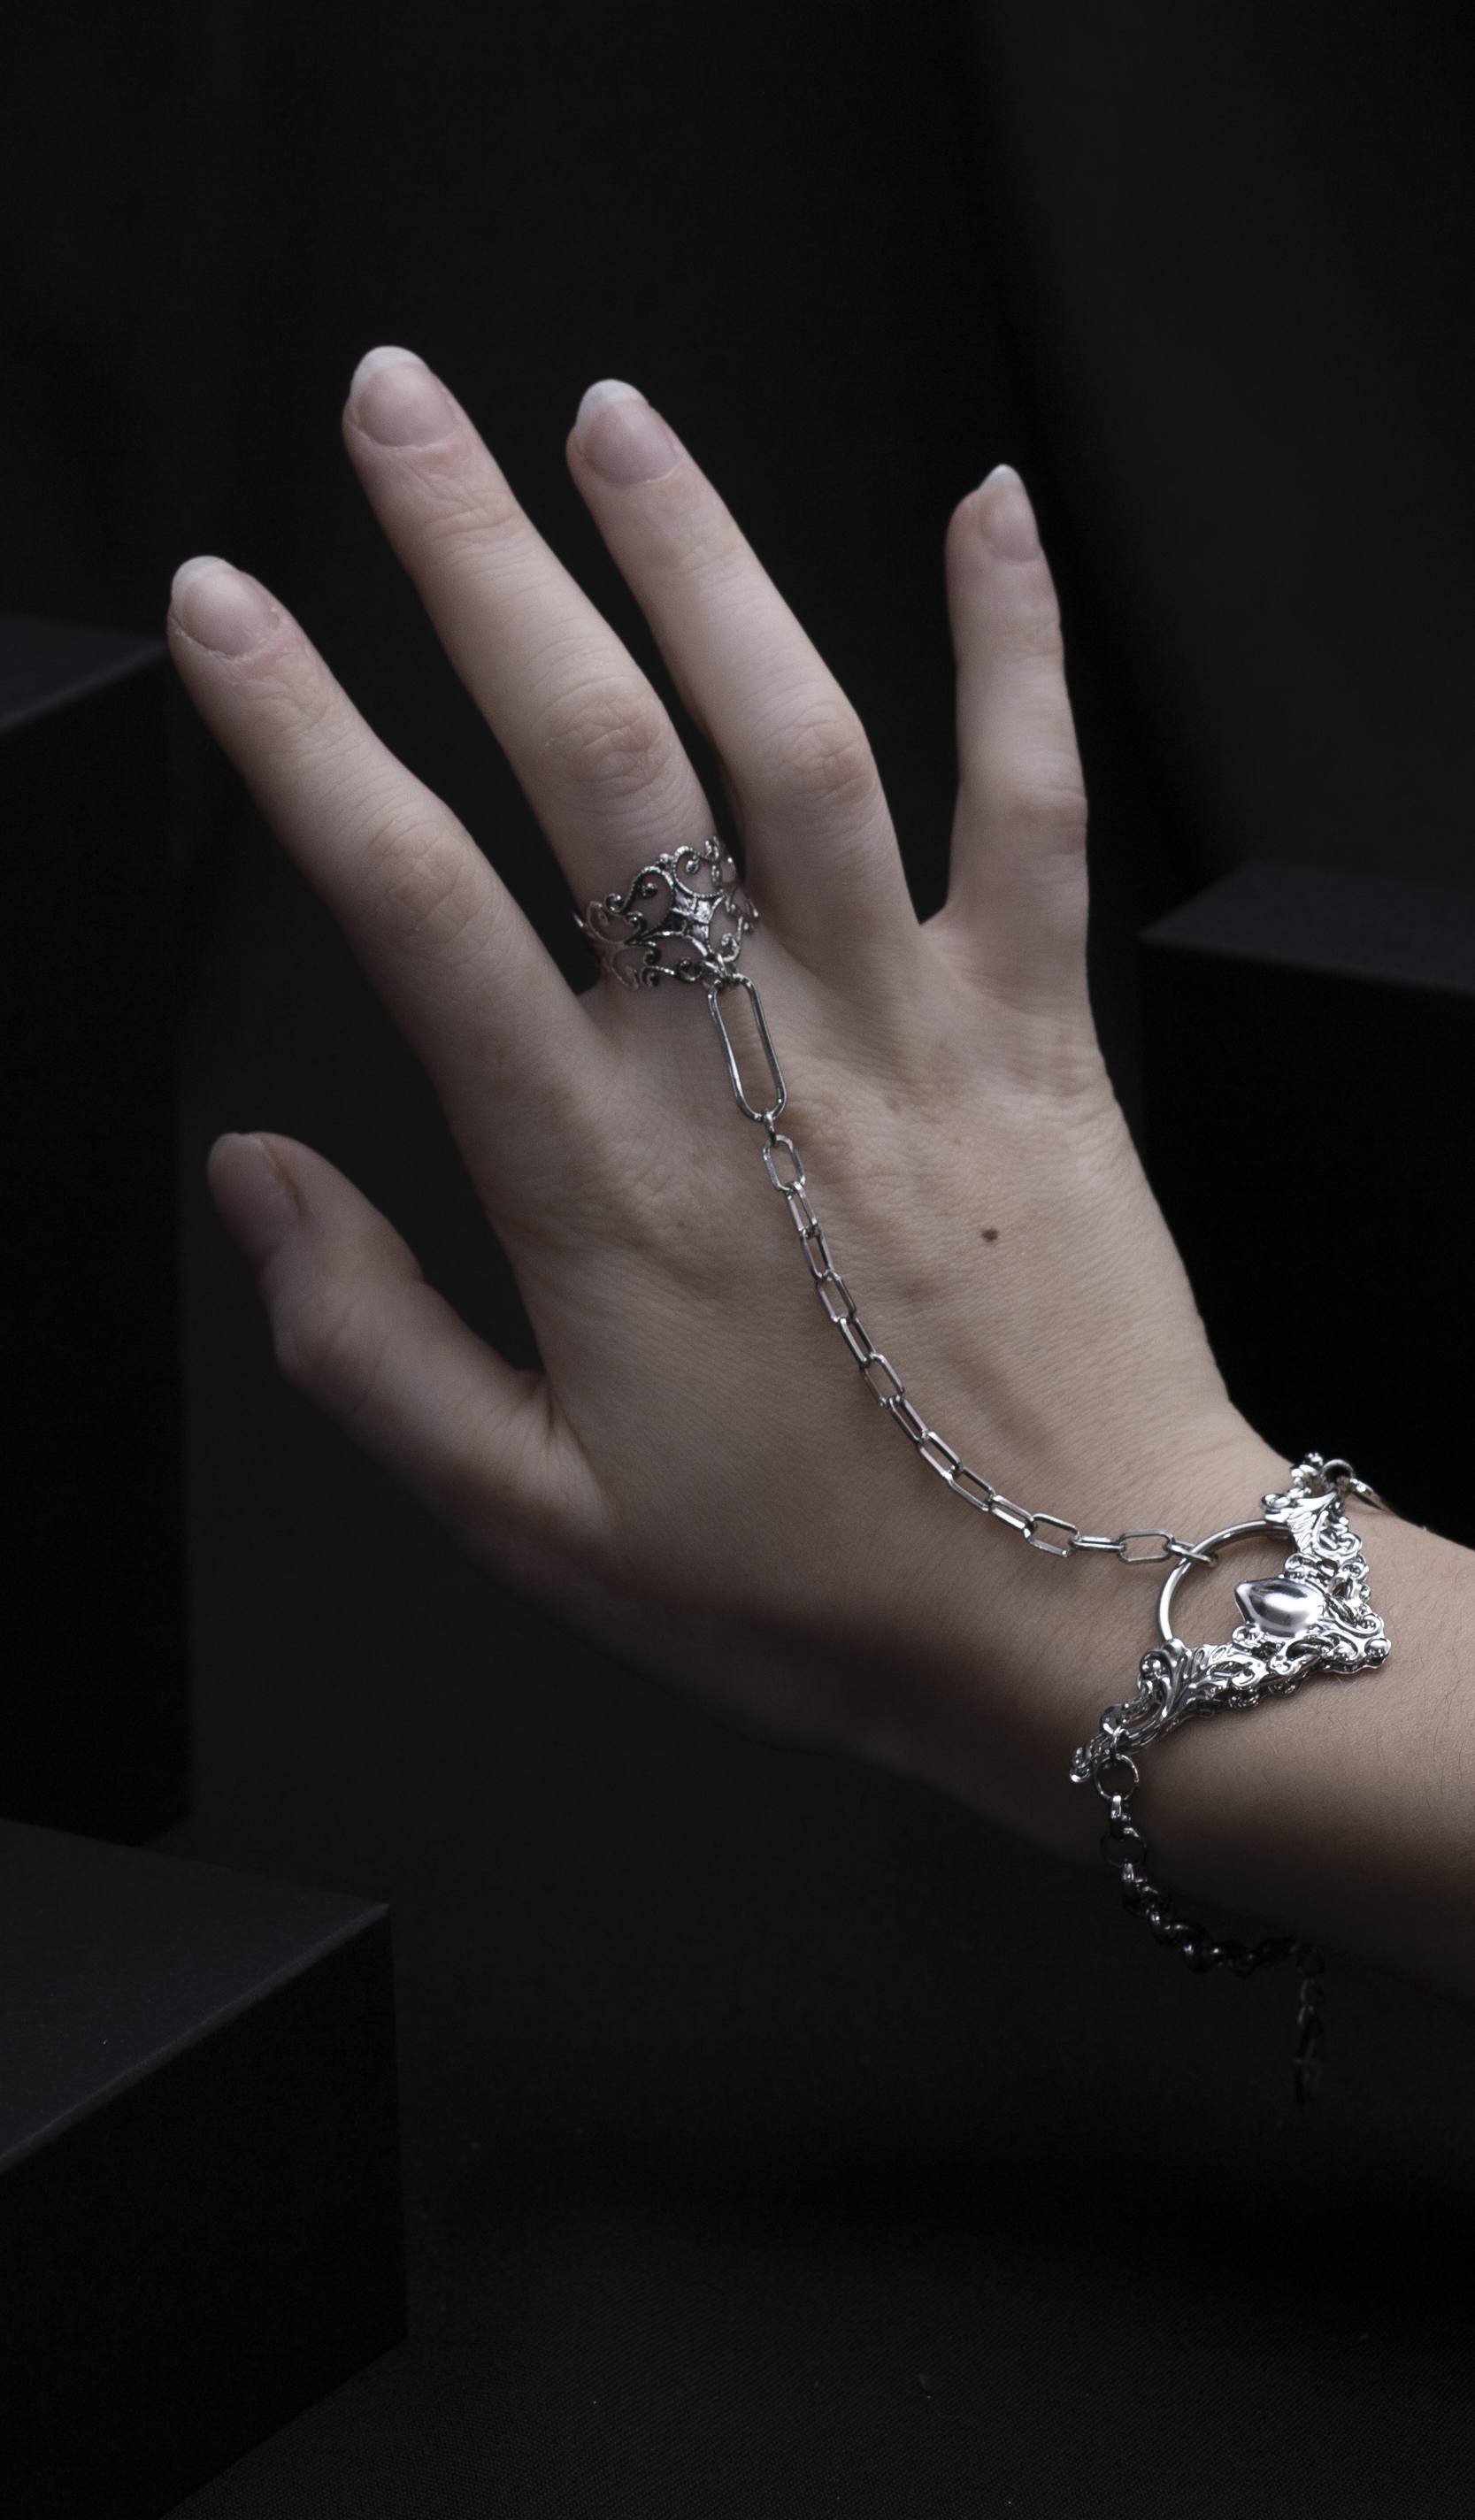 Elegant Myril Jewels hand chain bracelet ring, intricately designed, casting a neo-gothic statement for those who celebrate dark-avantgarde fashion, showcased against a shadowed background